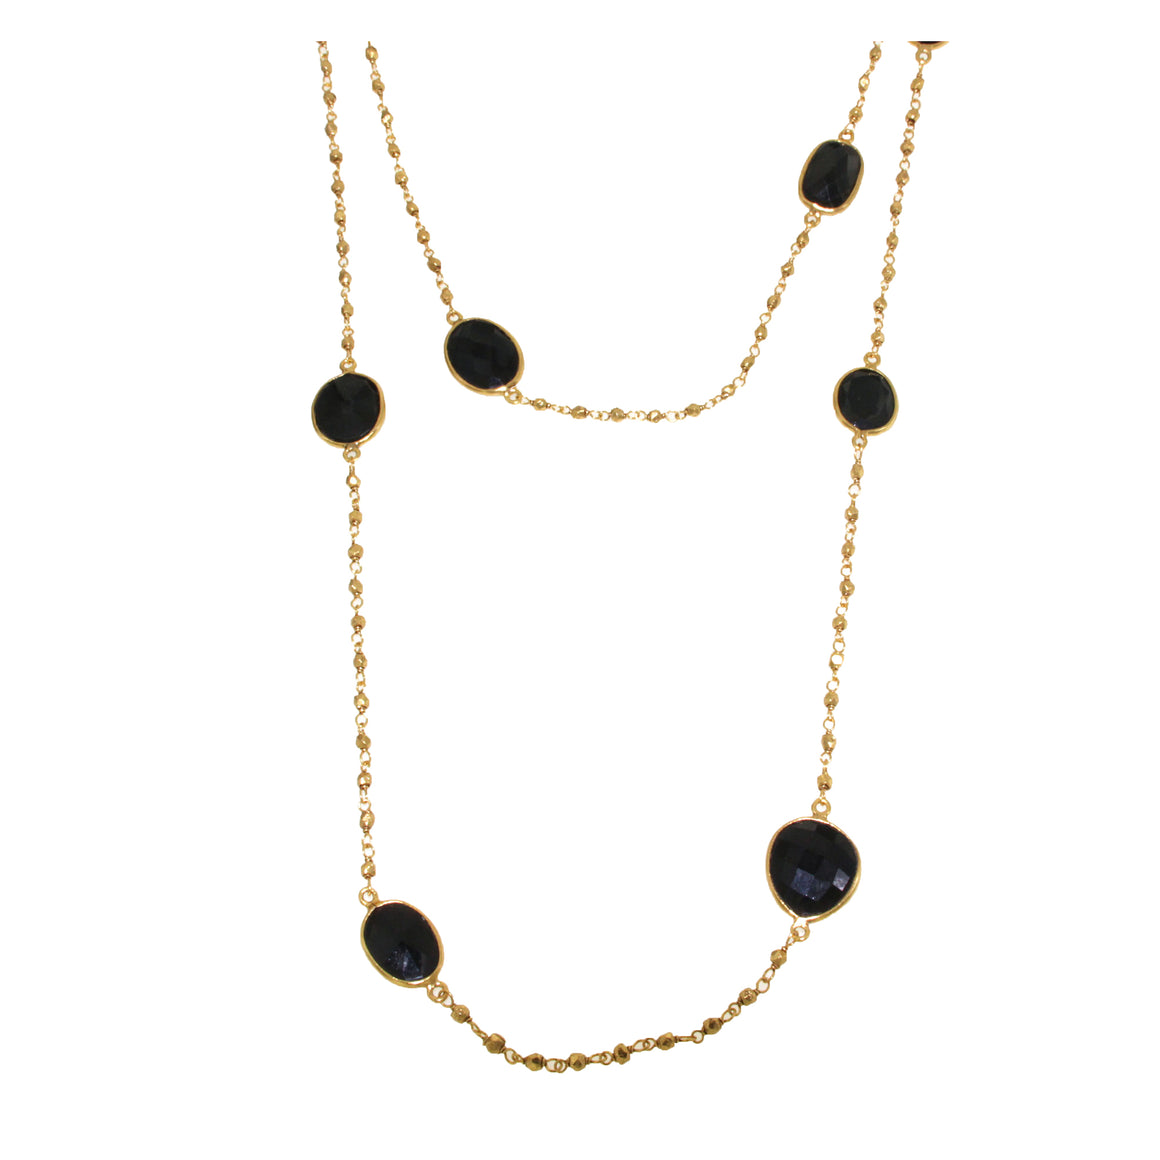 Classic handcrafted chain with Black Onyx strung along a 38" chain. A beautiful bezel set station necklace in one of our classic colors. Set in 22 carat Vermeil over Sterling Silver.